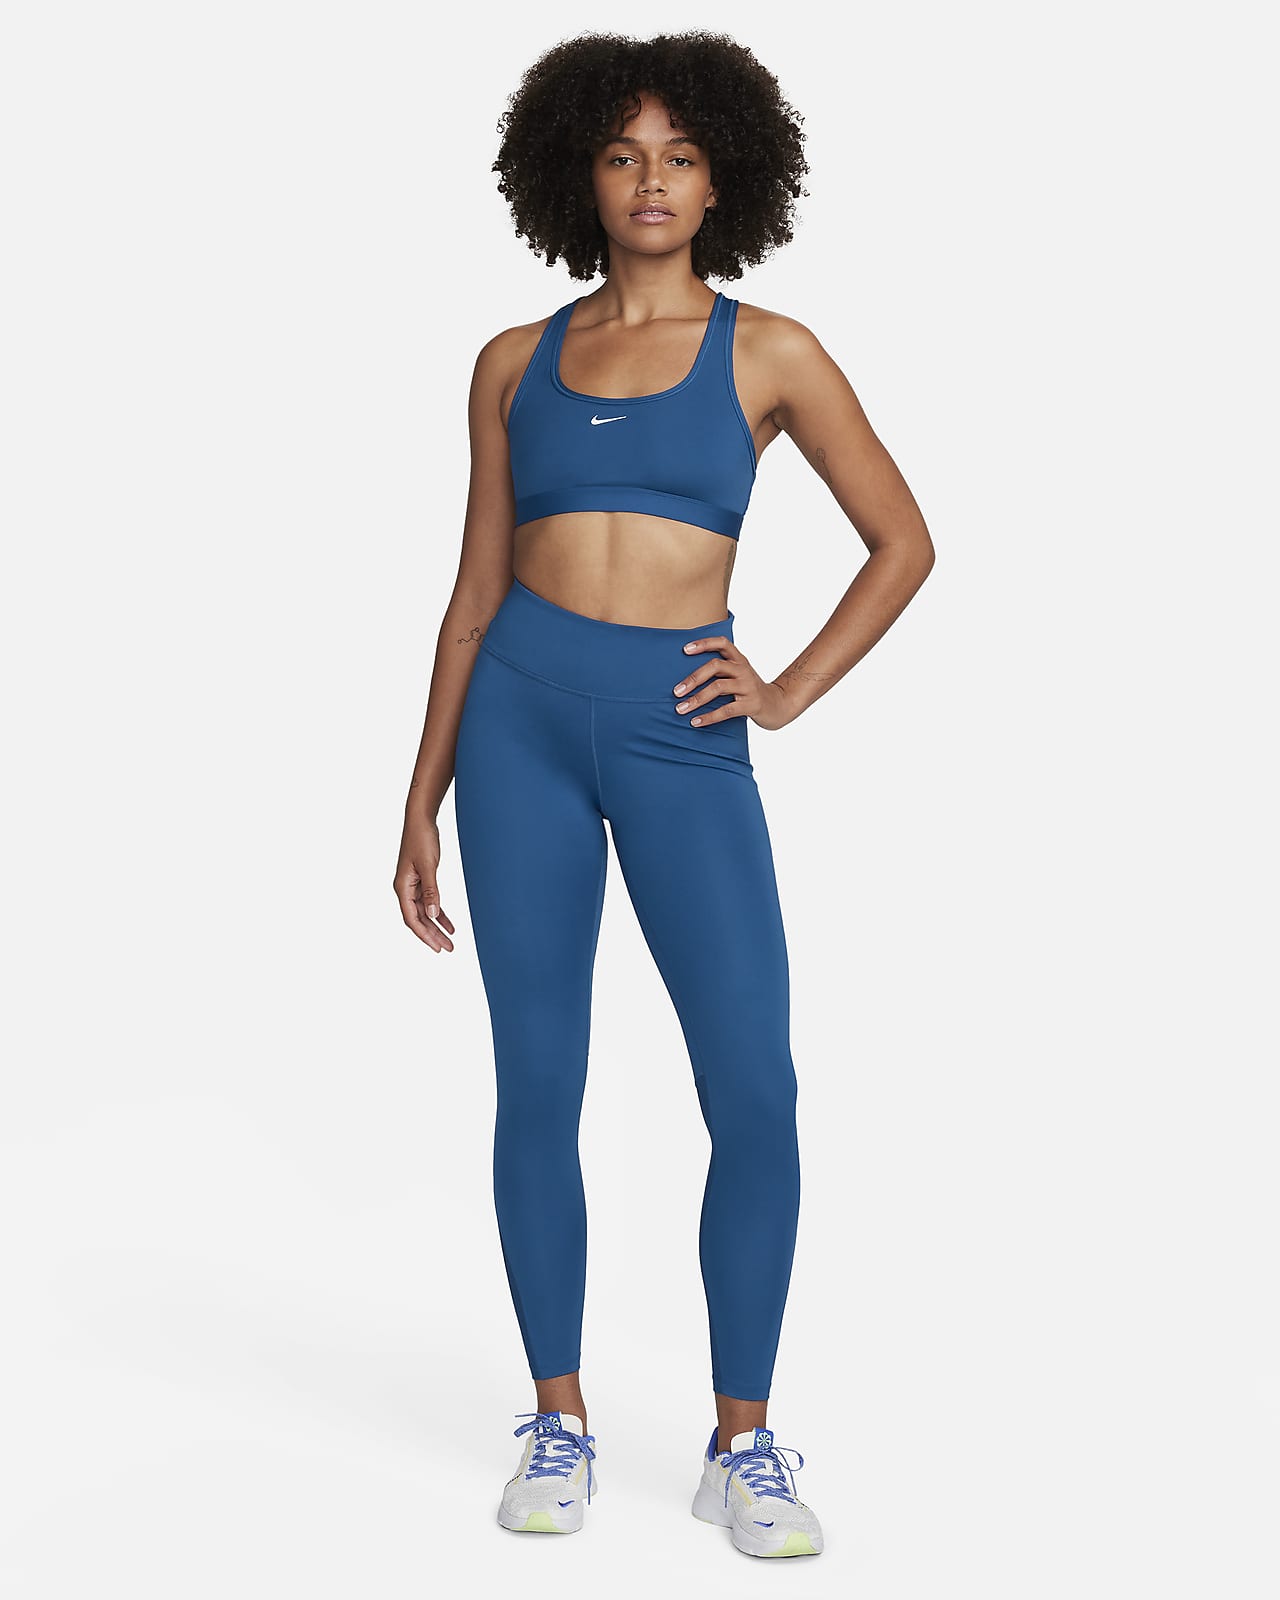 Nike Womens ONE Luxe Tight Womens AT3098-010 Size 2XL